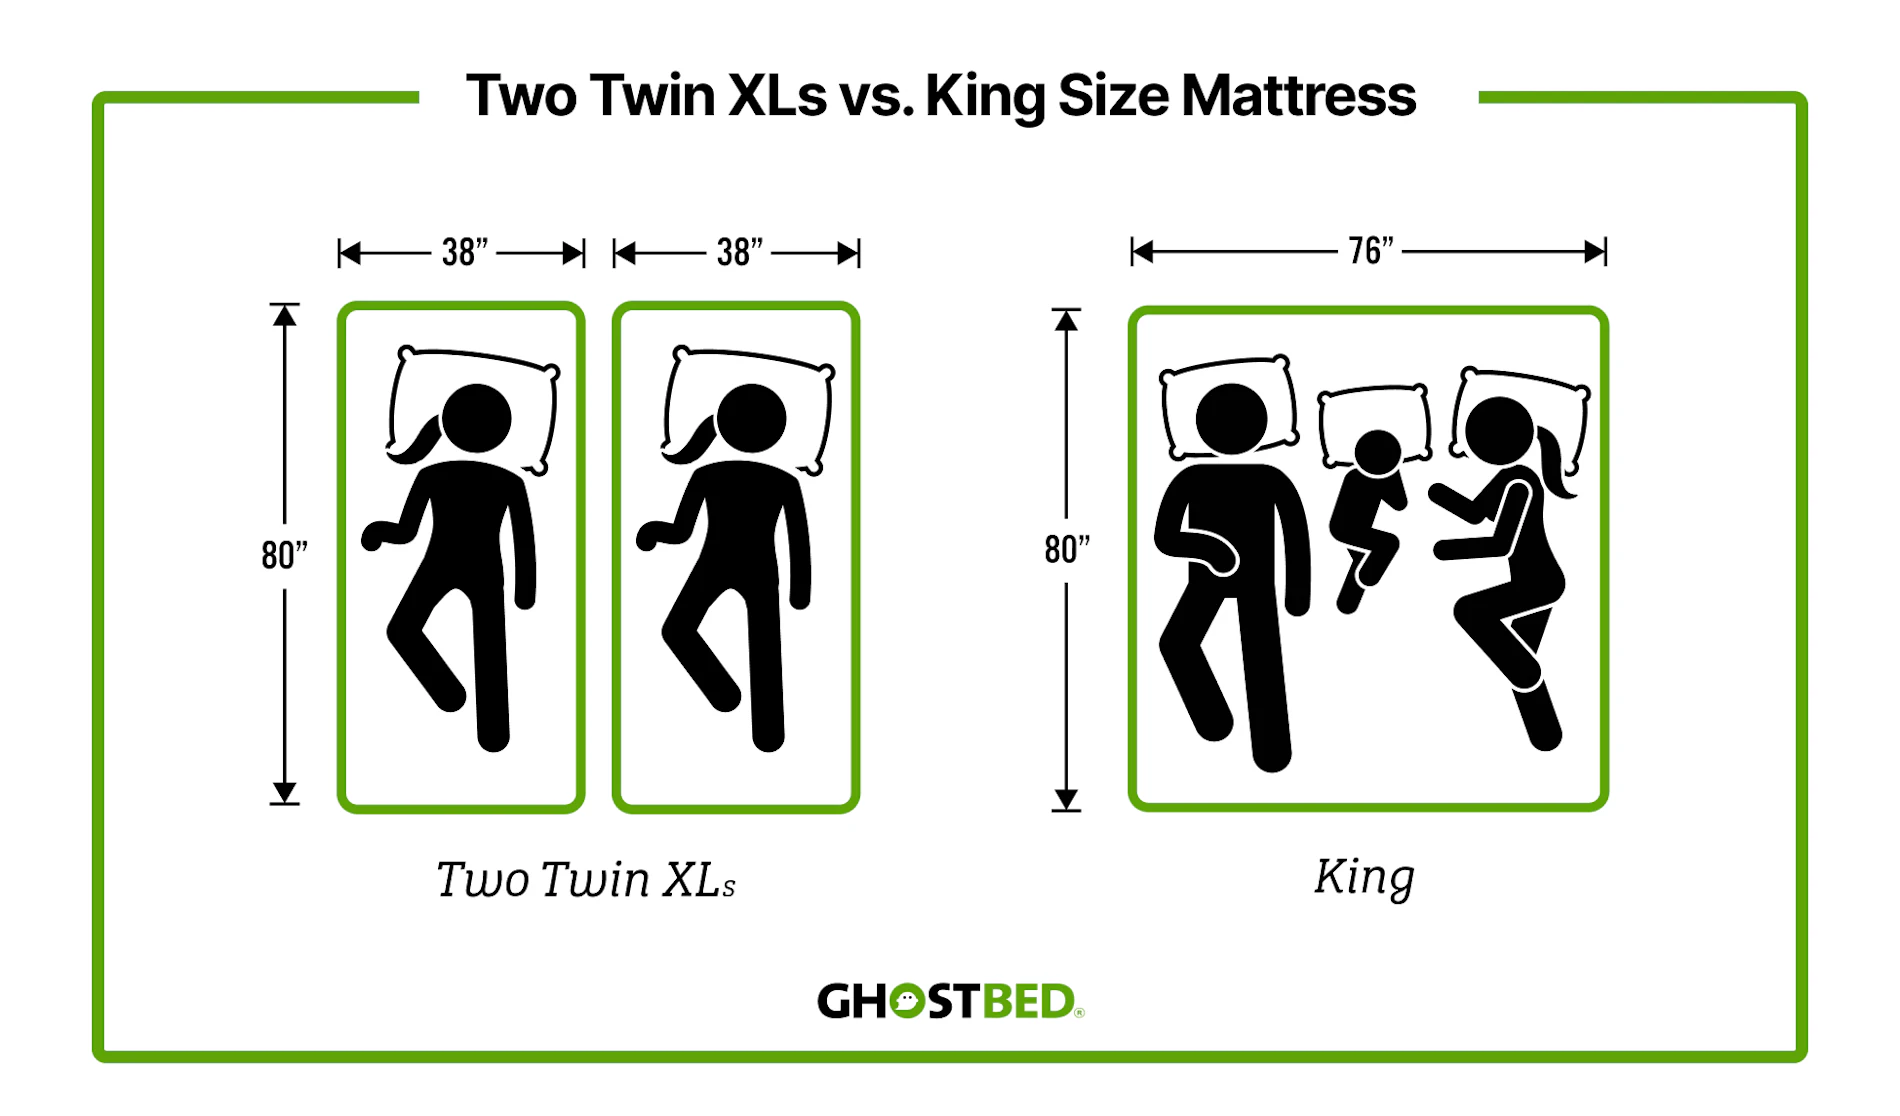 Two twin XL size mattresses (76" by 80" total) compared to a king size mattress (76" by 80").